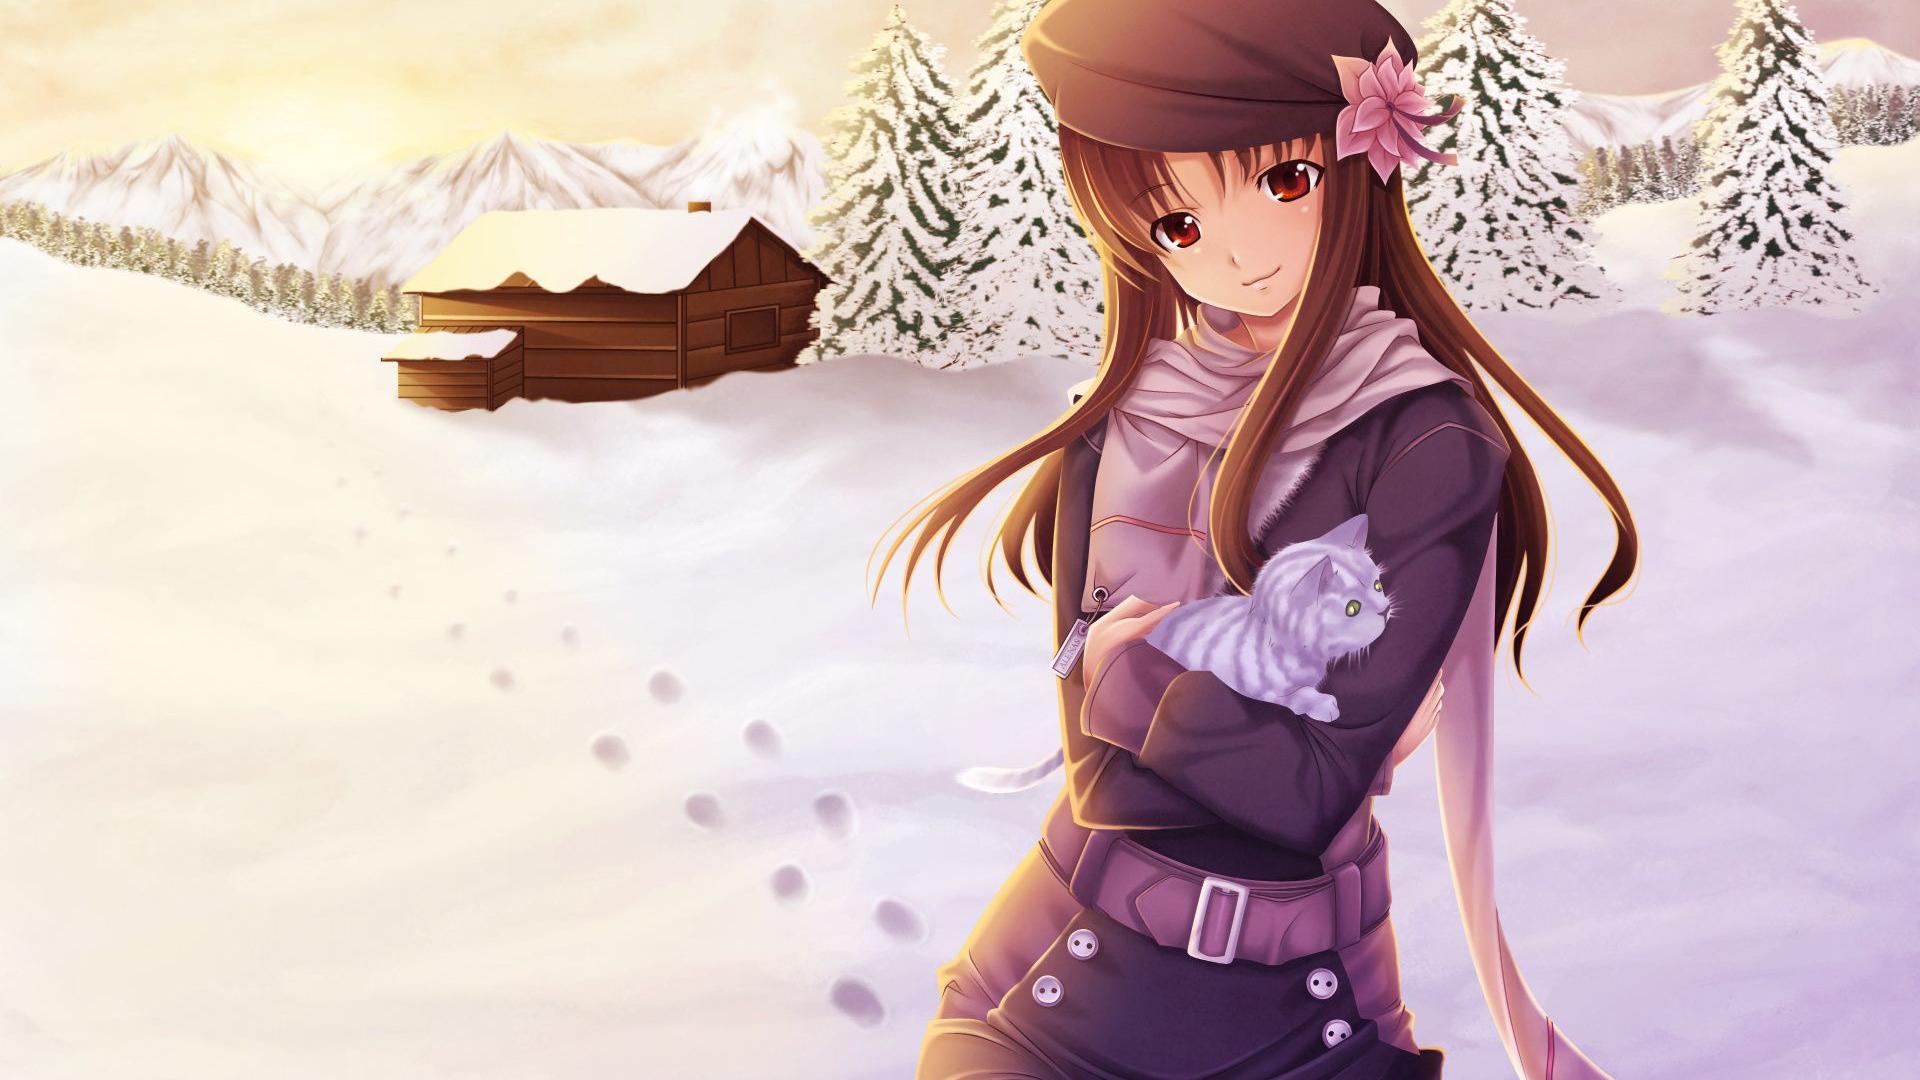 Collection of Animated Girls Wallpaper on HDWallpapers